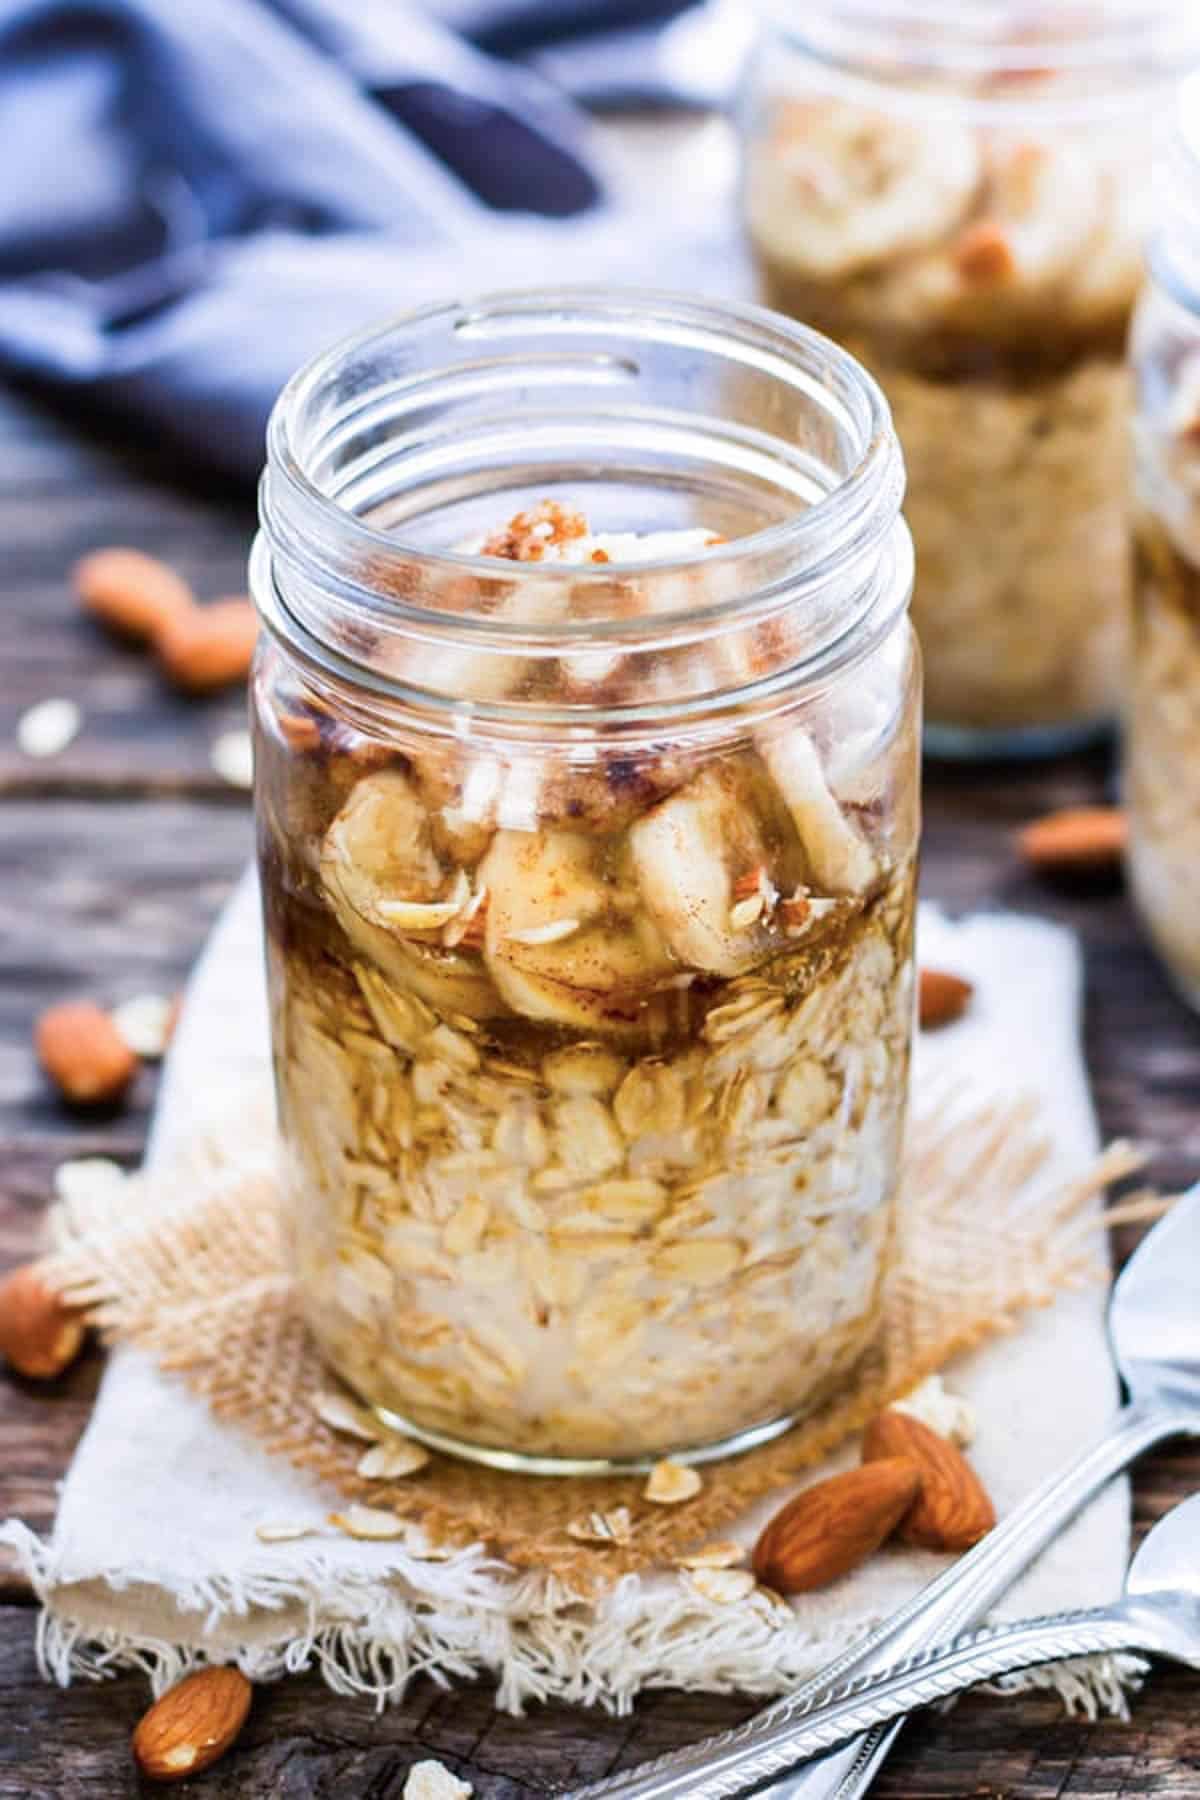 Three jars filled with Almond Butter Banana Overnight Oats on a table for breakfast.